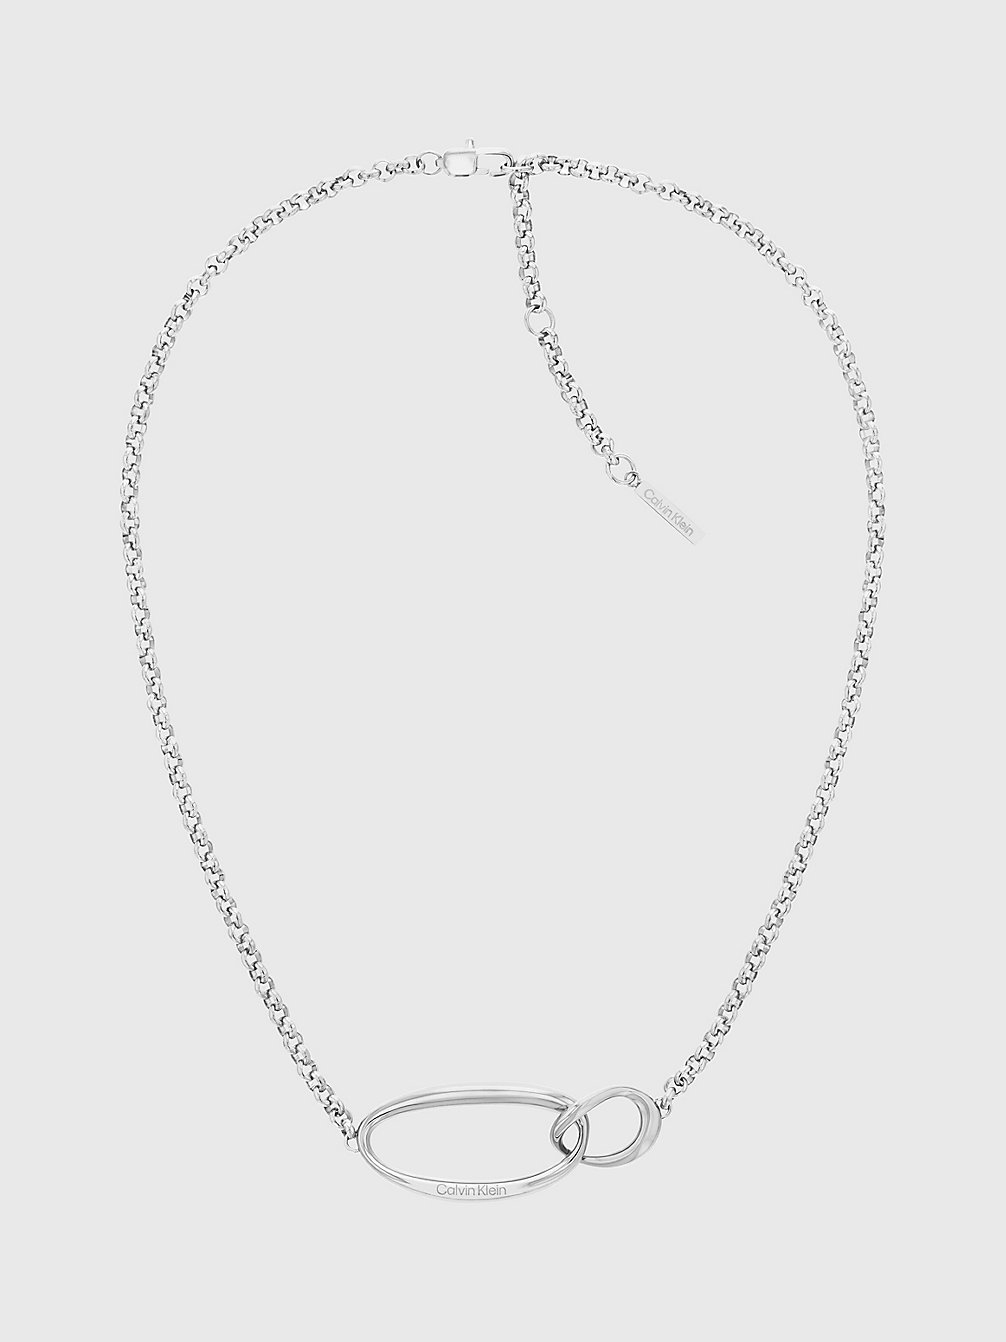 SILVER Necklace - Playful Organic Shapes undefined women Calvin Klein